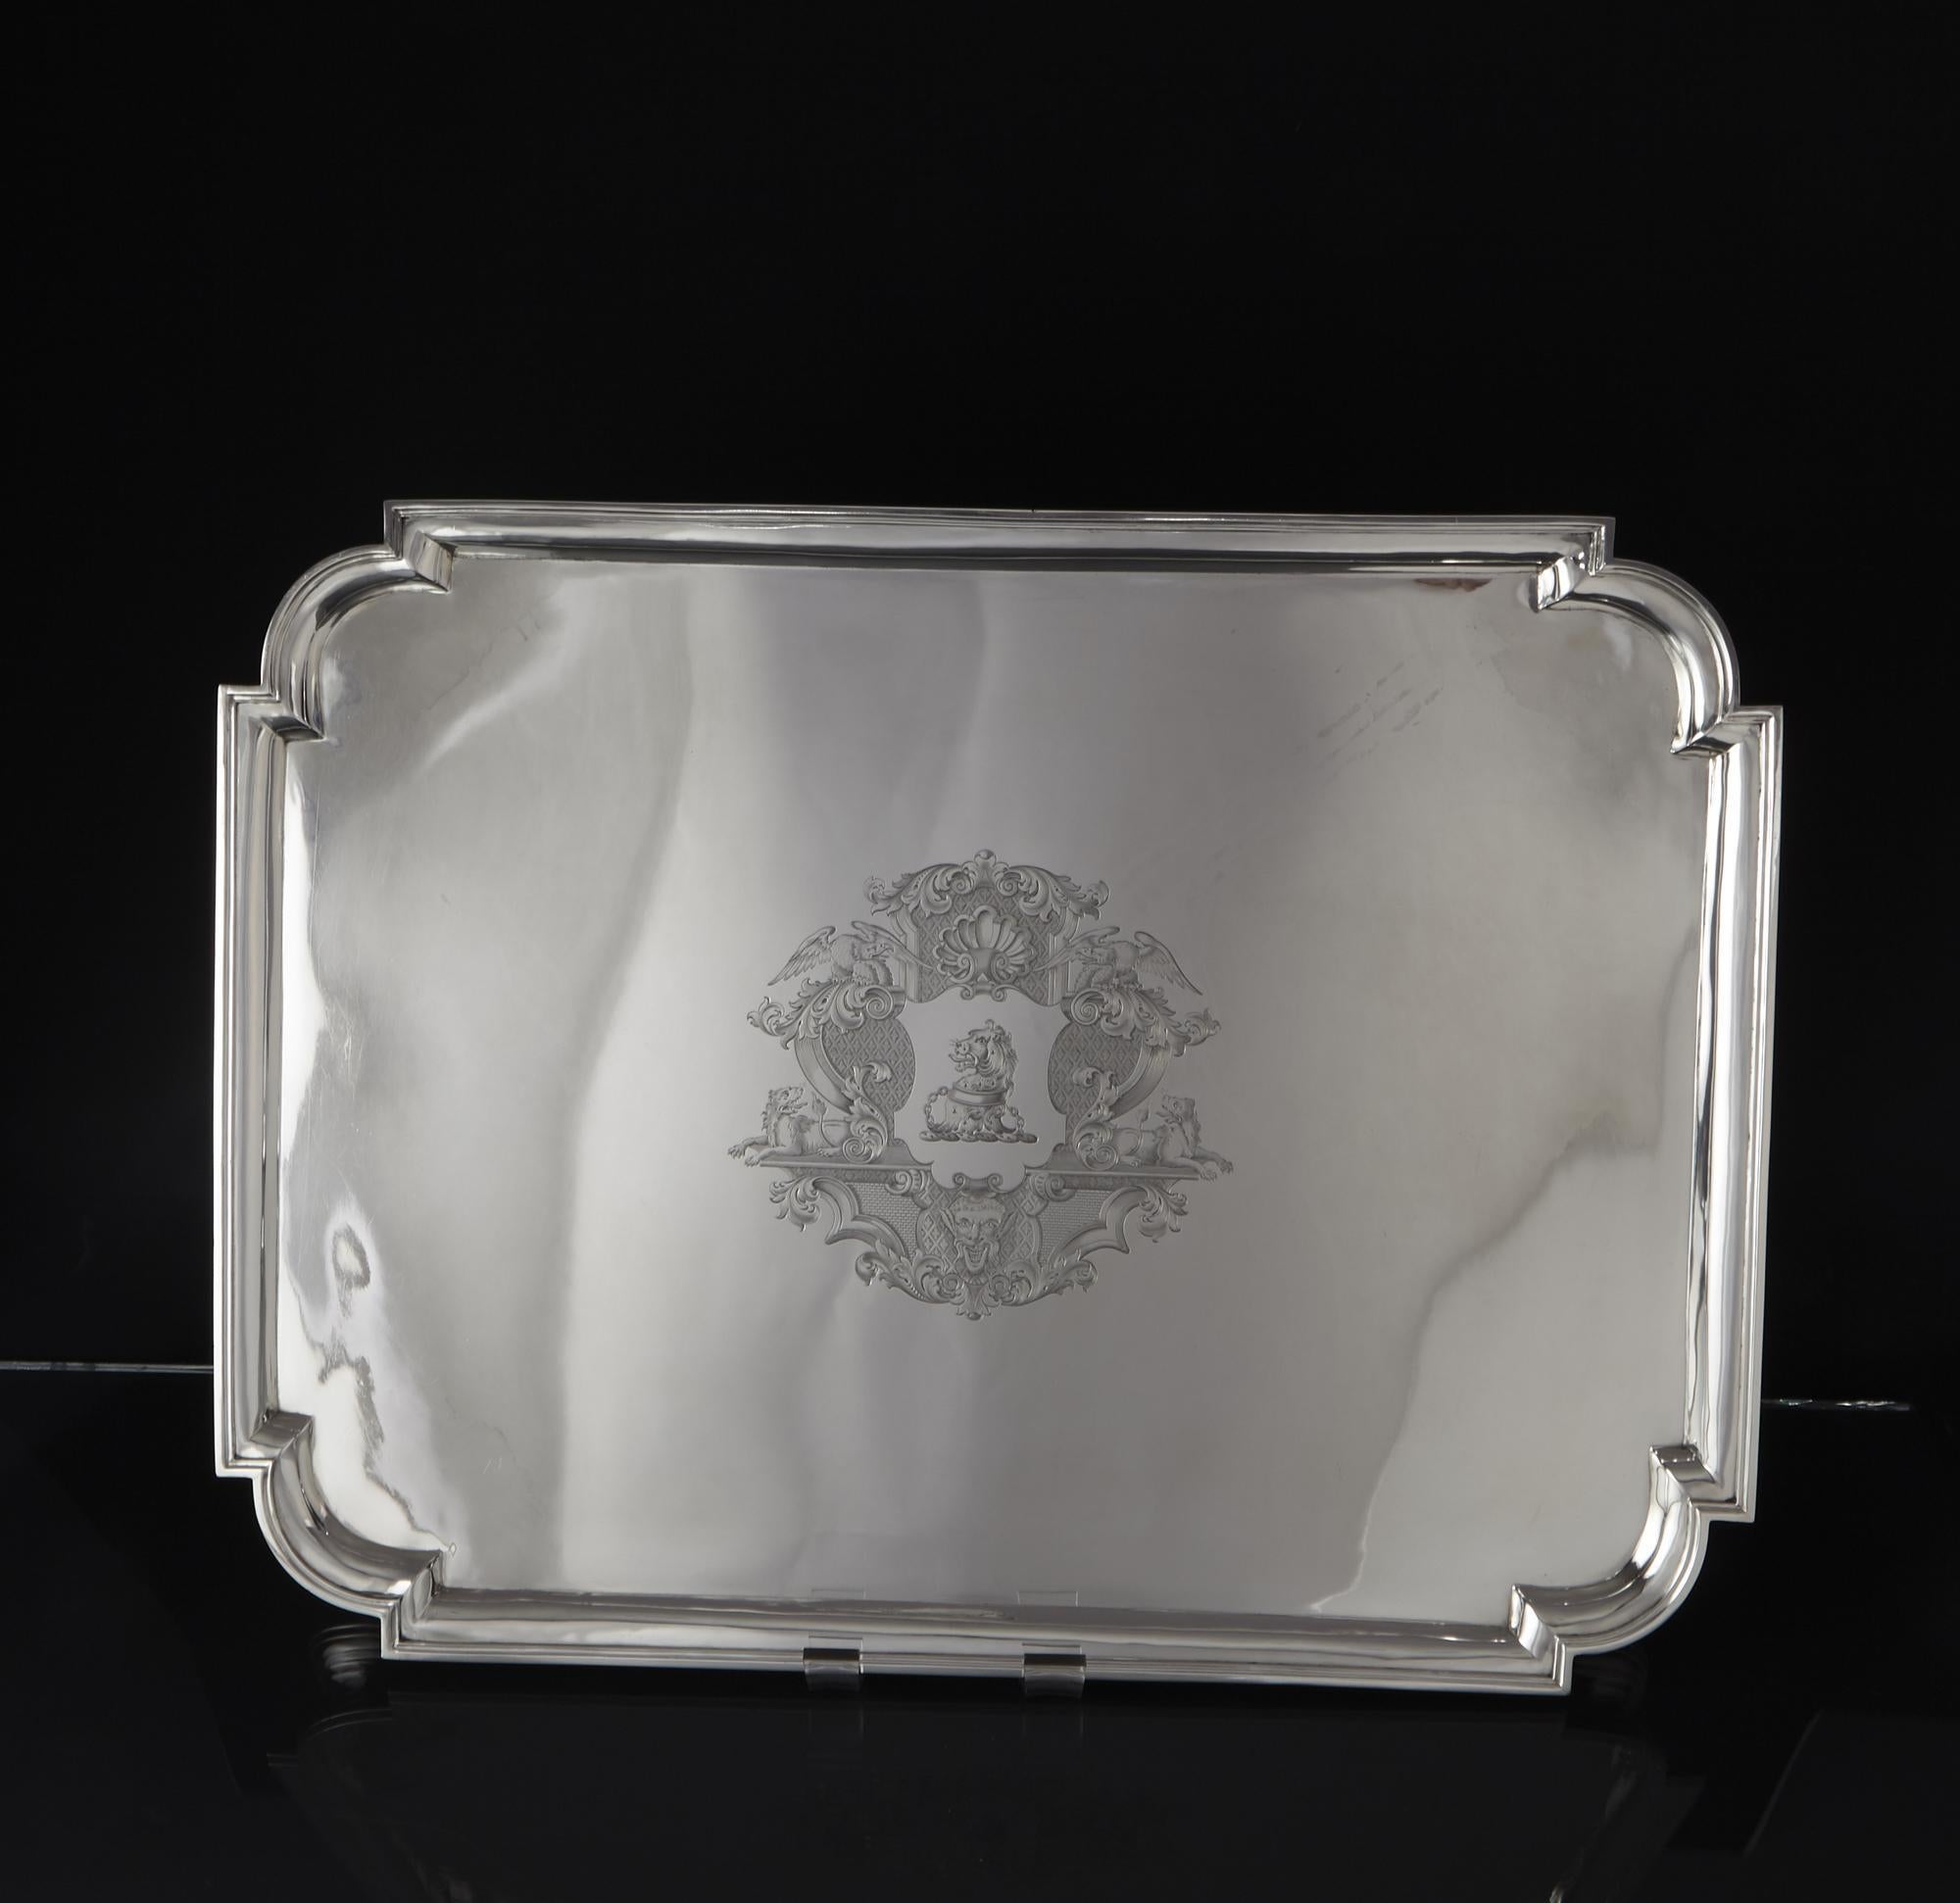 Large and wonderful quality antique silver tray or salver in the George II Videau style. It is oblong in form with shaped corners and mounted on four bracket feet. In the centre is a decorative cartouche, in the George II style, enclosing a crest of